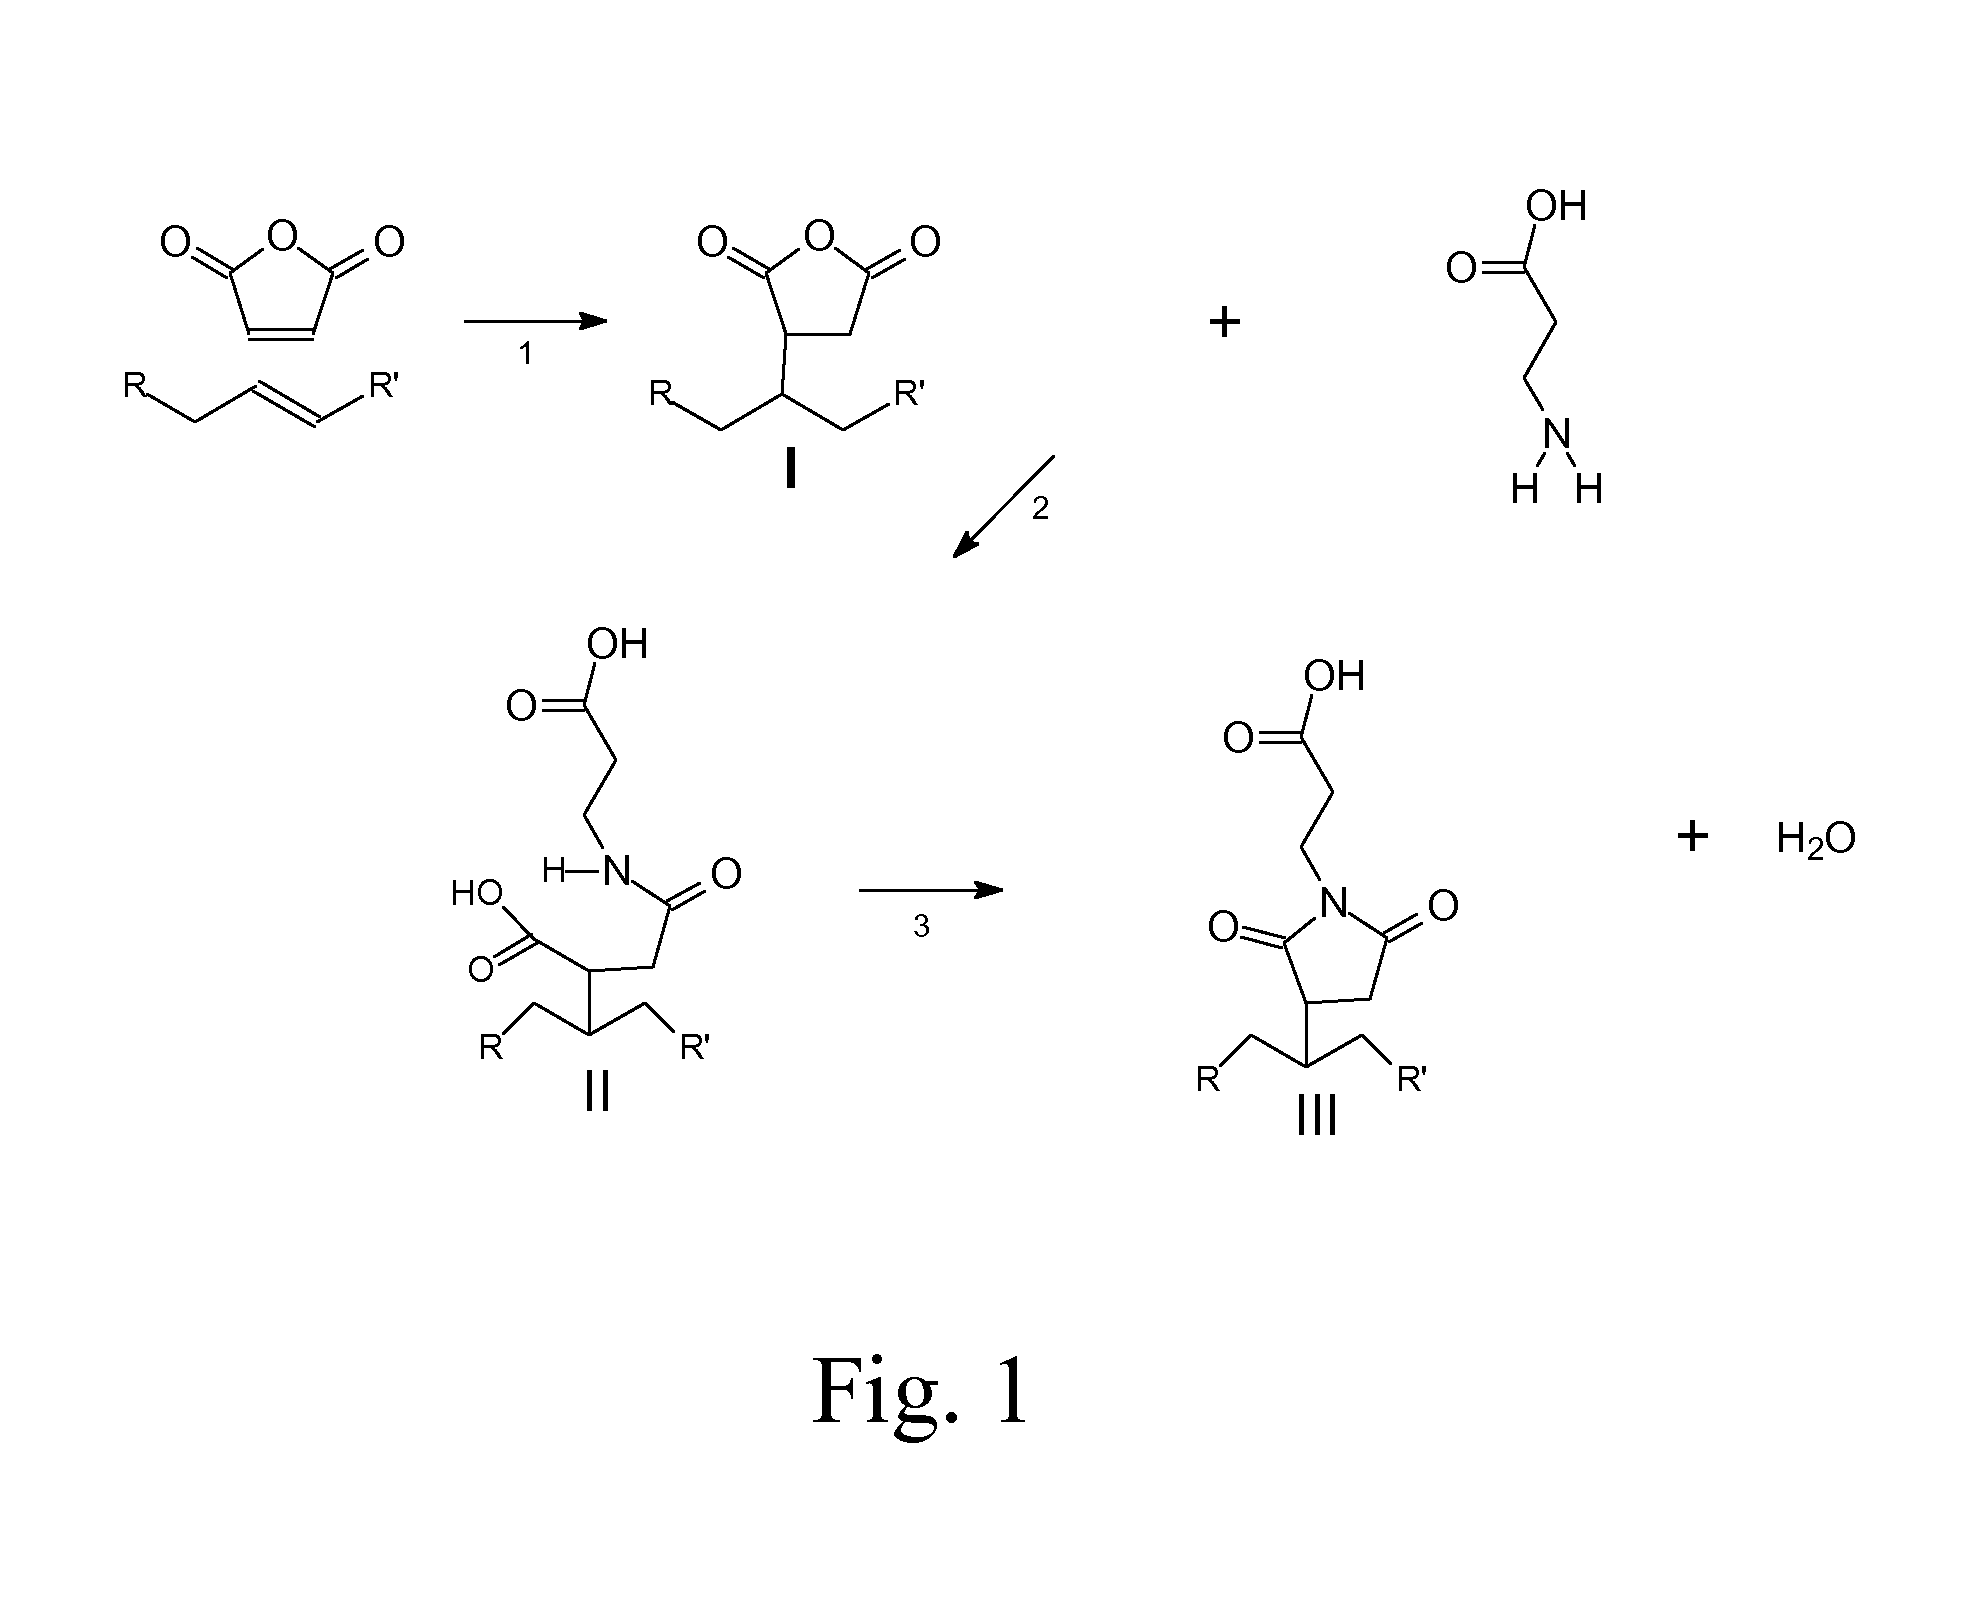 Aqueous Coating Compositions Including The Reaction Product Of Maleic Anhydride With An Unsaturated Compound And An Amine